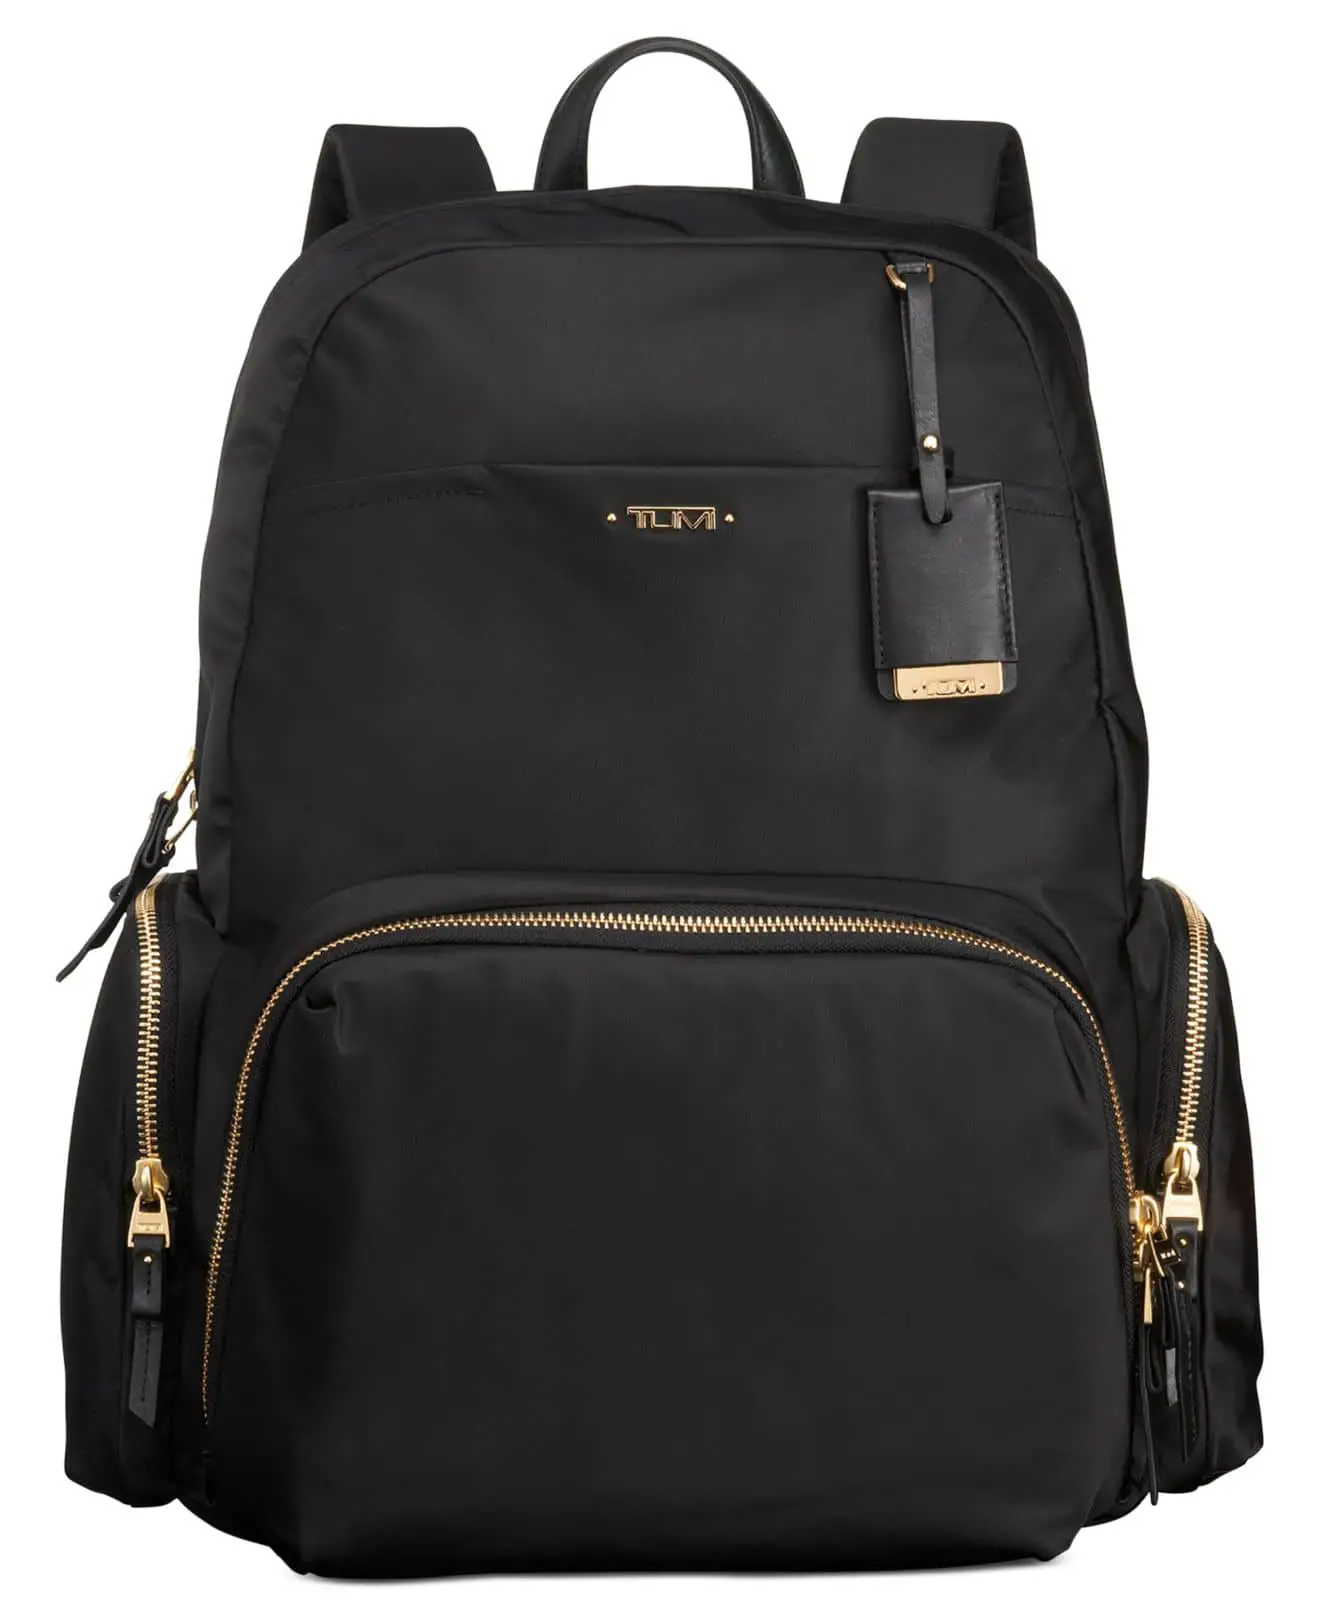 How to Clean a Tumi Backpack